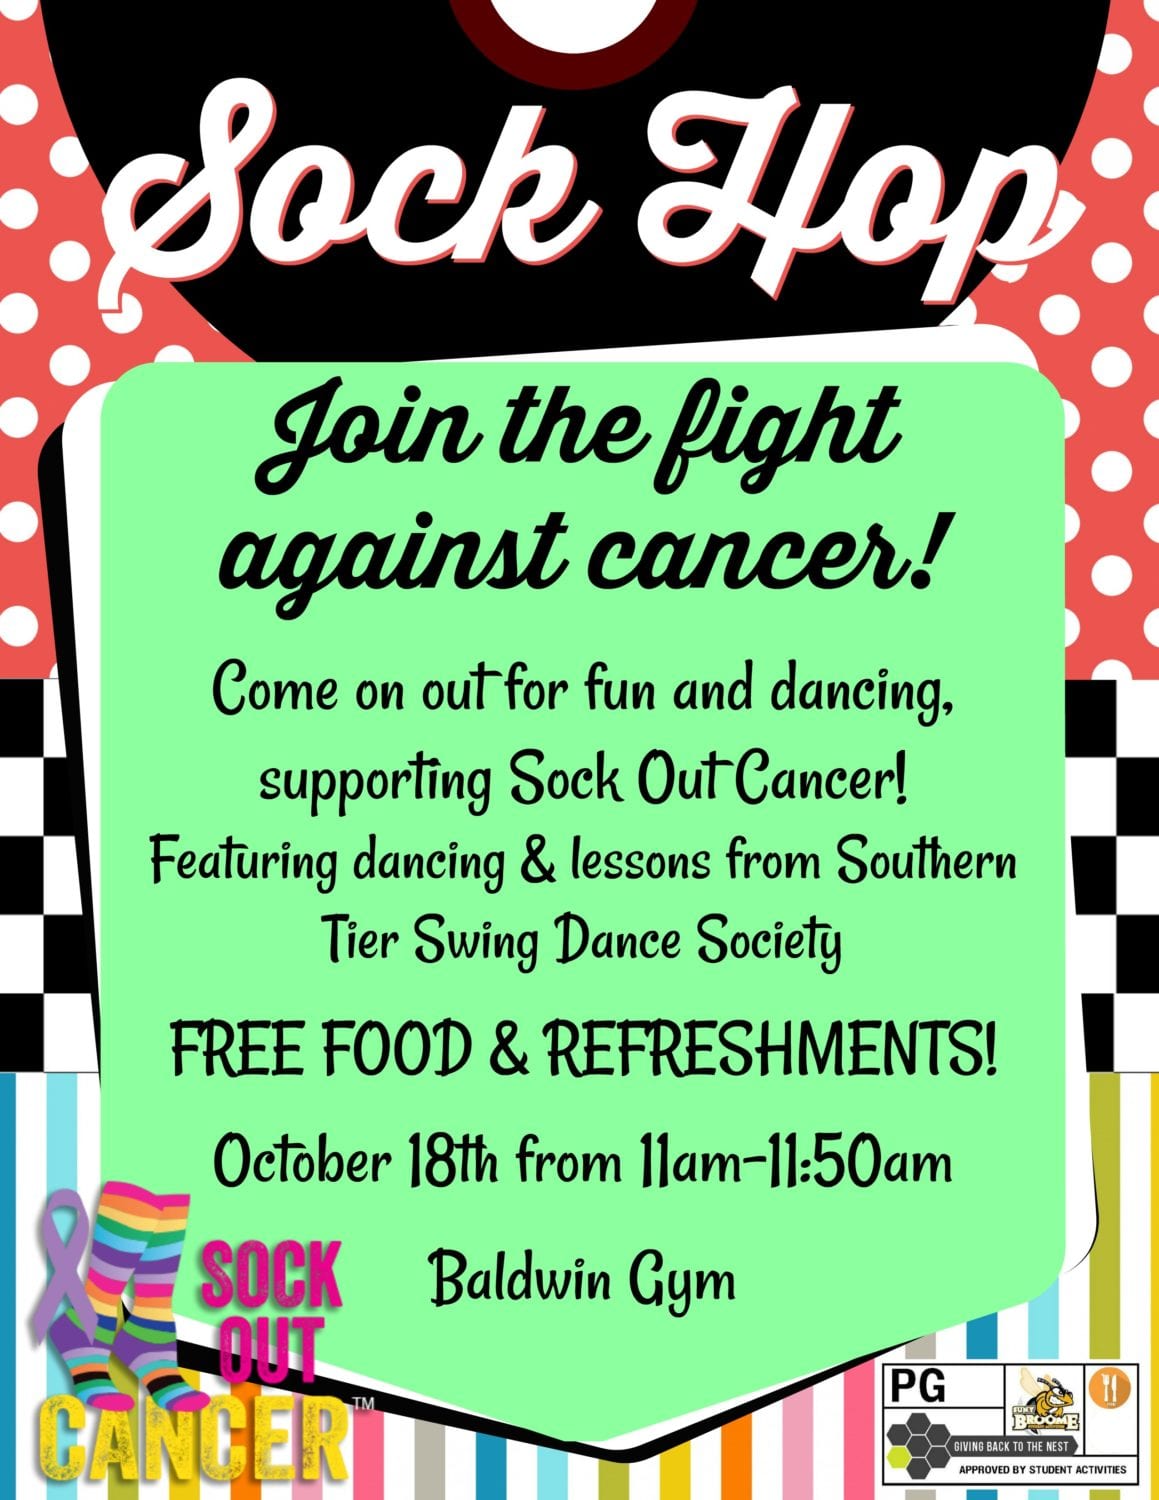 Get your saddle shoes: Sock Hop to fight cancer on Oct. 18